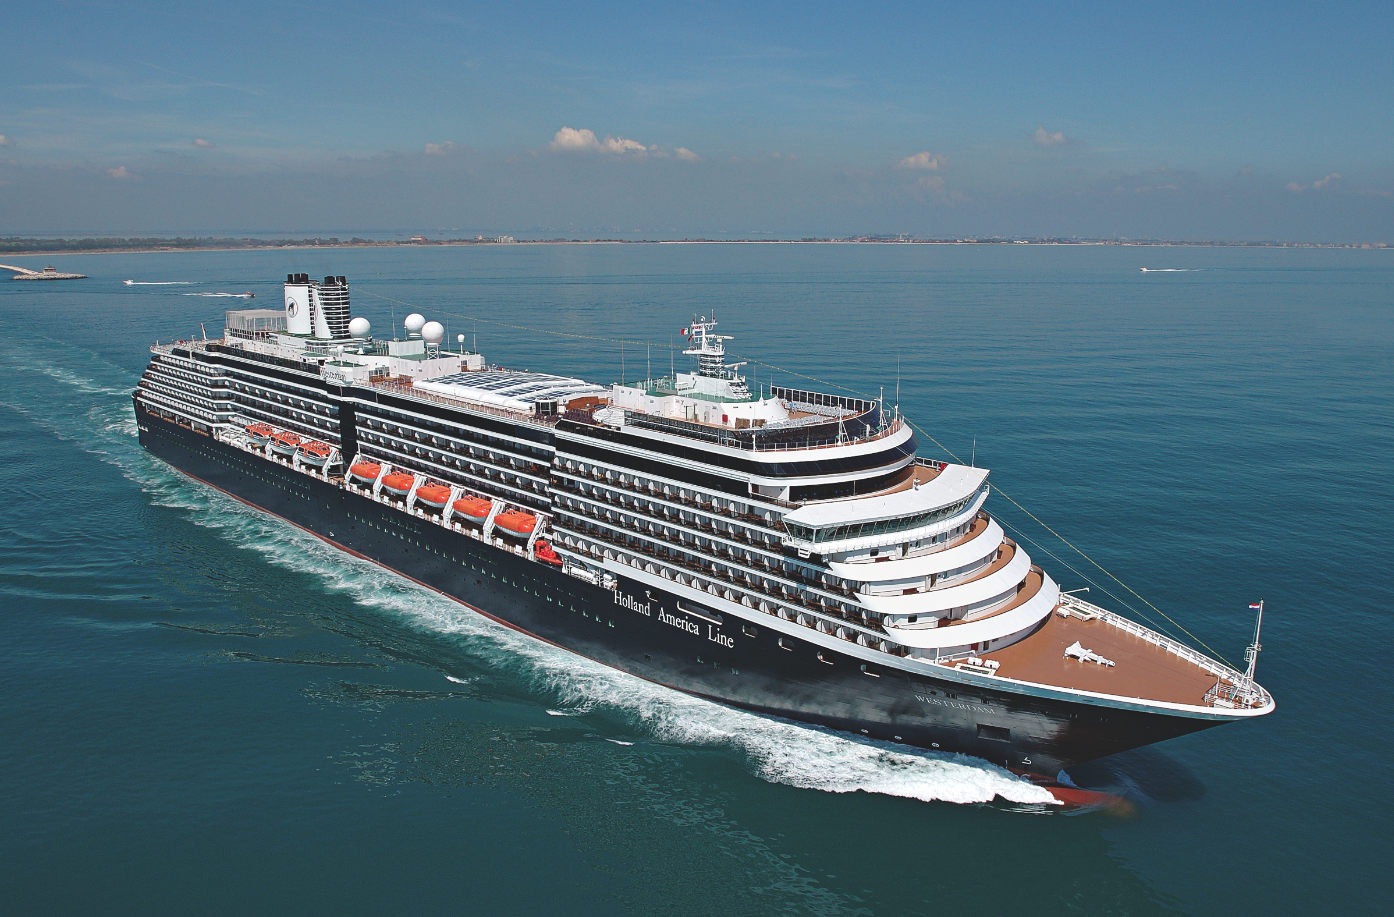 The Westerdam is one of the ships that will be on these itineraries